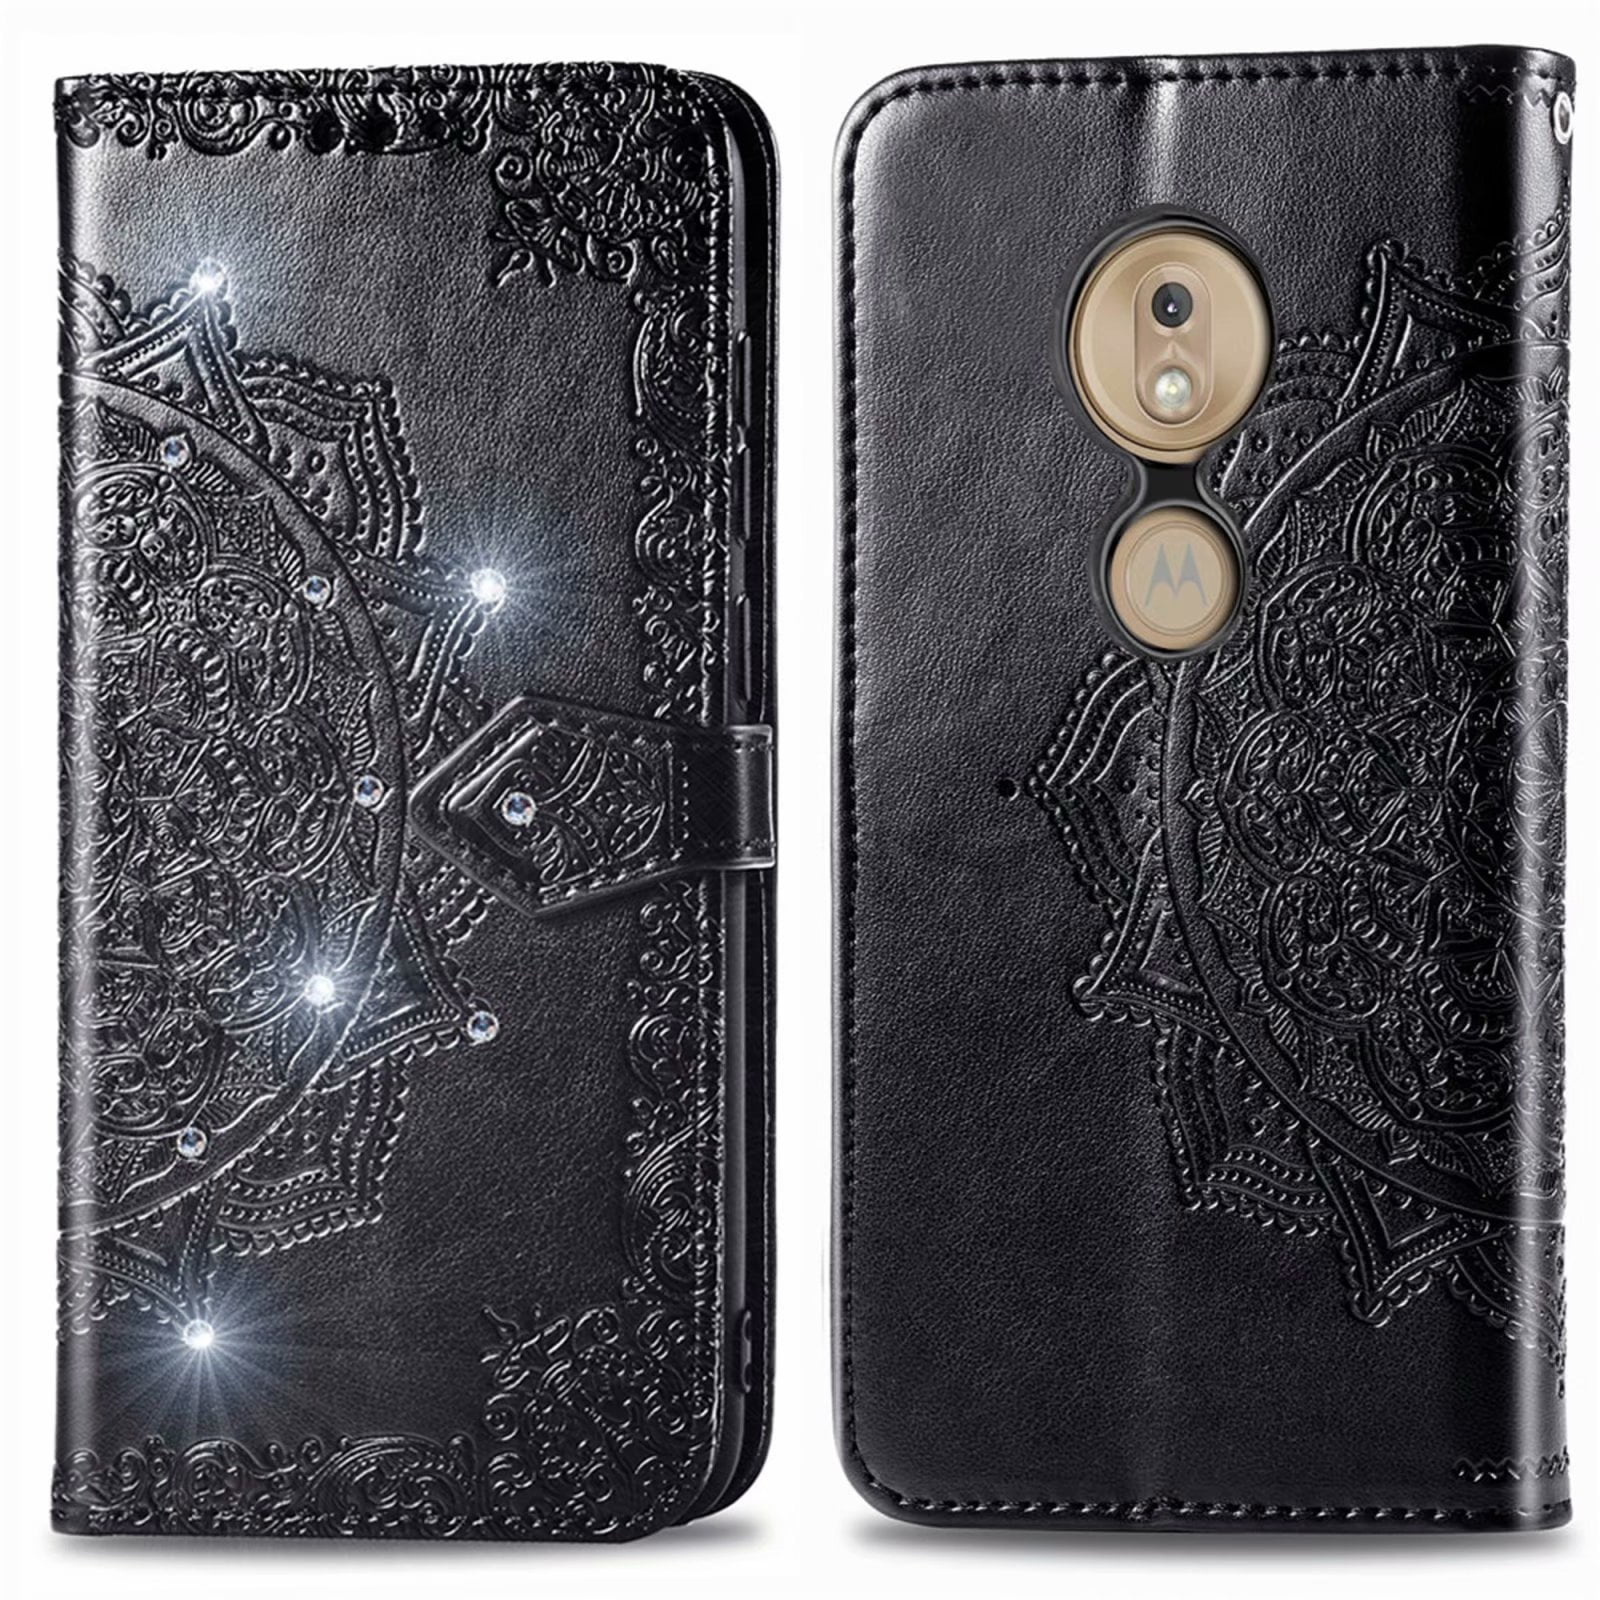 Shockproof Leather Flip Cover Case for Motorola Moto G7 G7 Plus with Card Holder Side Pocket Kickstand NETXI150688 N8 G7Plus NEXCURIO Wallet Case for Moto G7